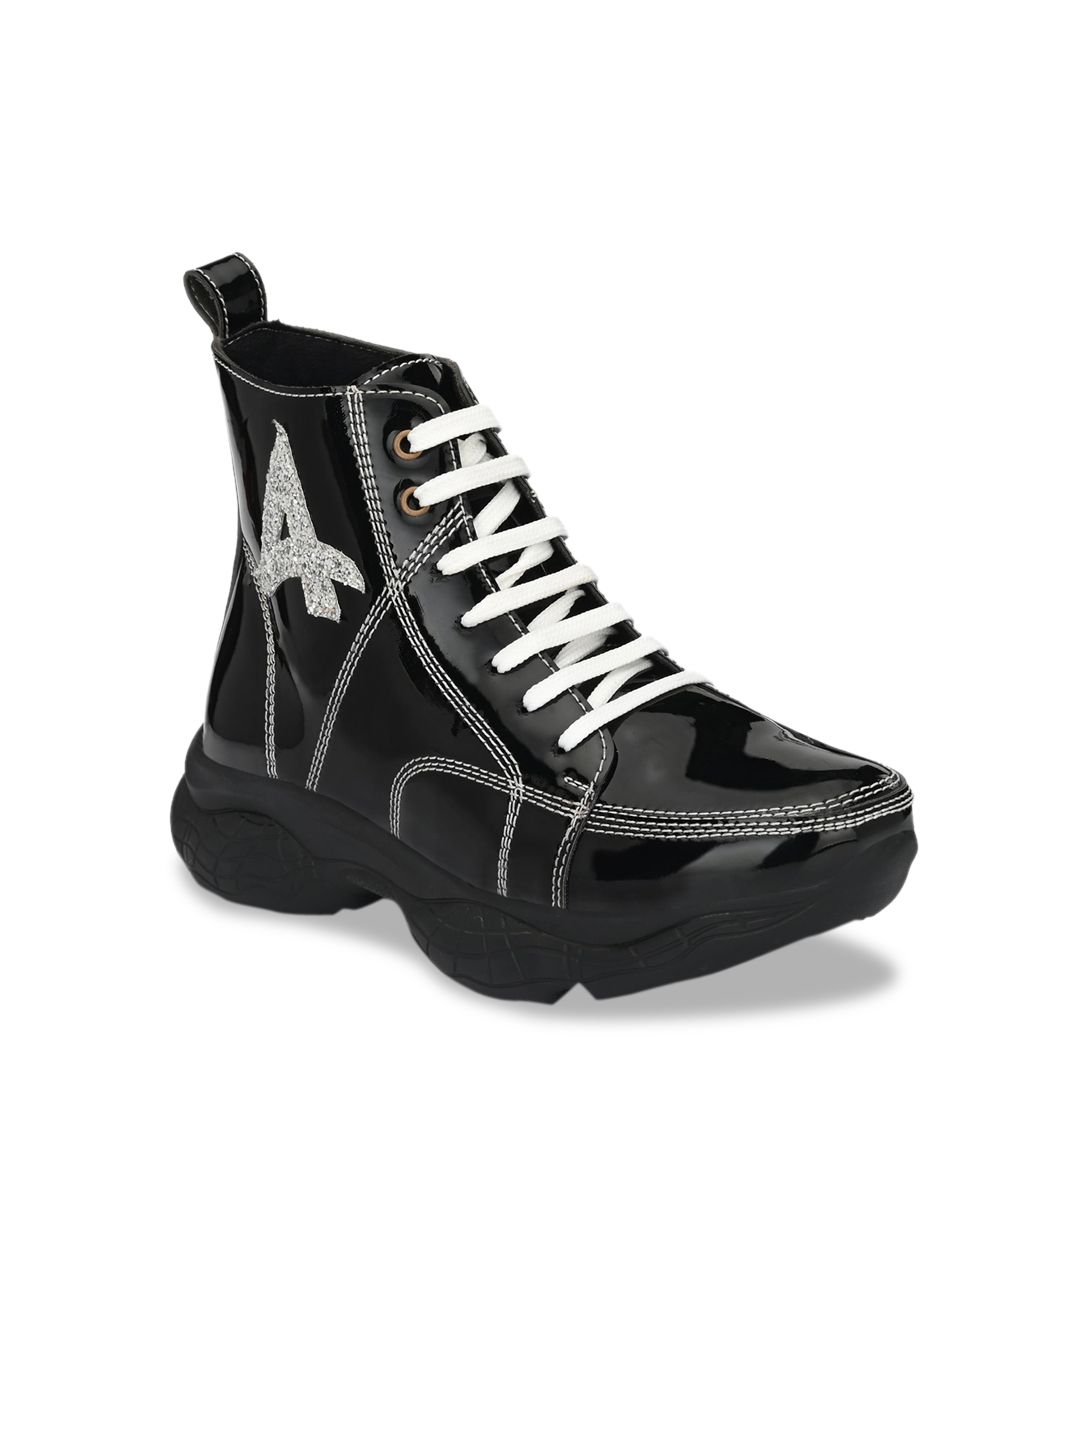 AfroJack Women Black & White Printed Mid-Top Sneakers Price in India